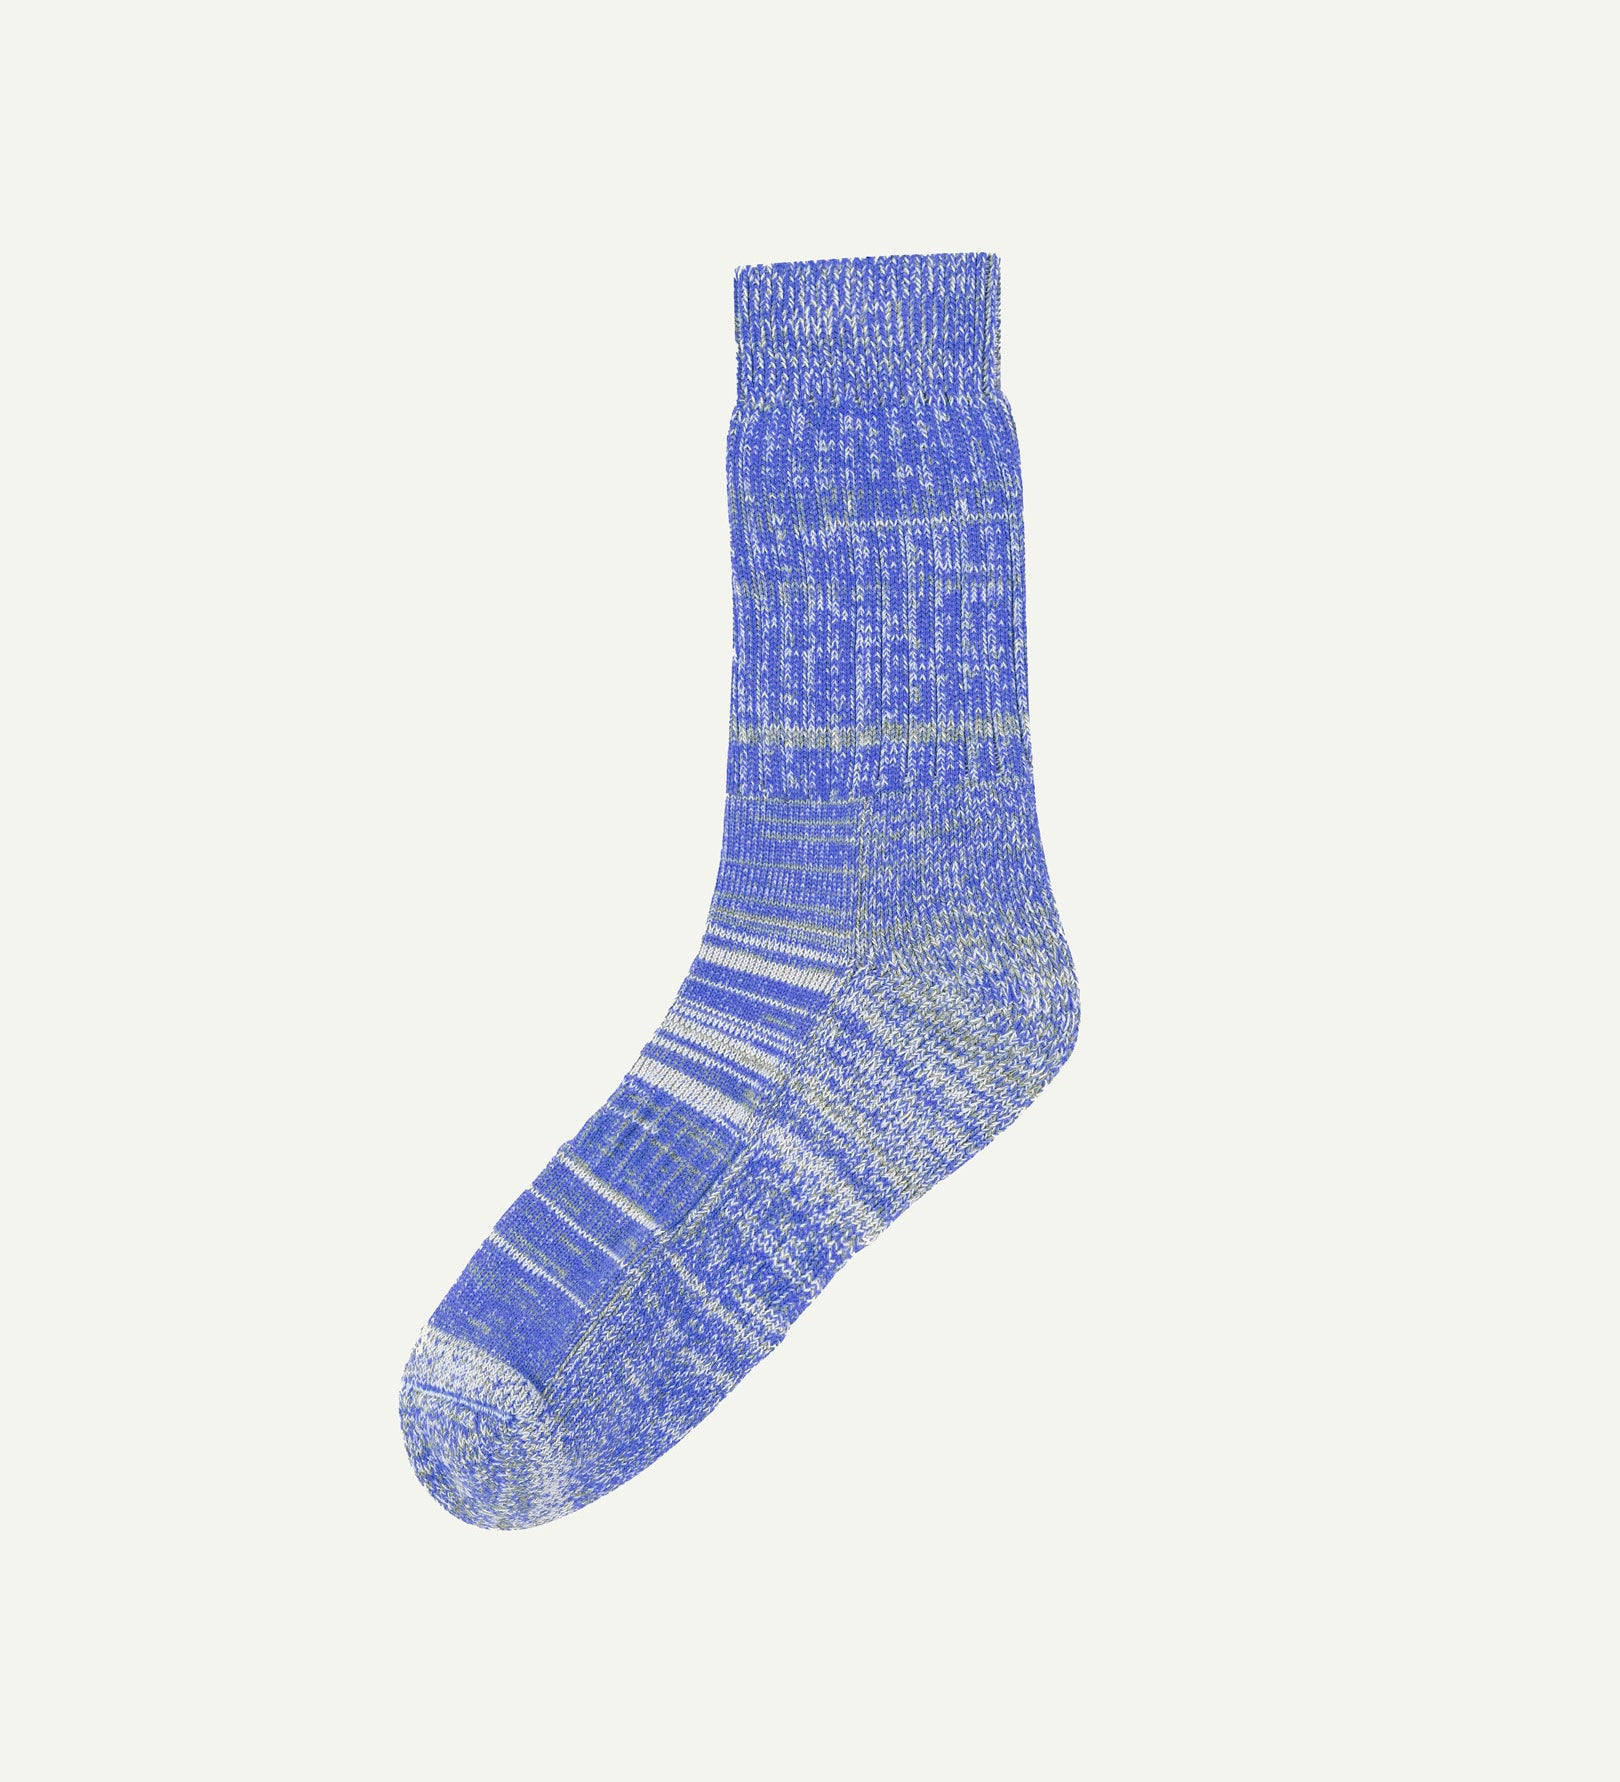 Flat view of Uskees 4006 organic cotton socks in ultra blue, showing subtle bands of blue, white and black